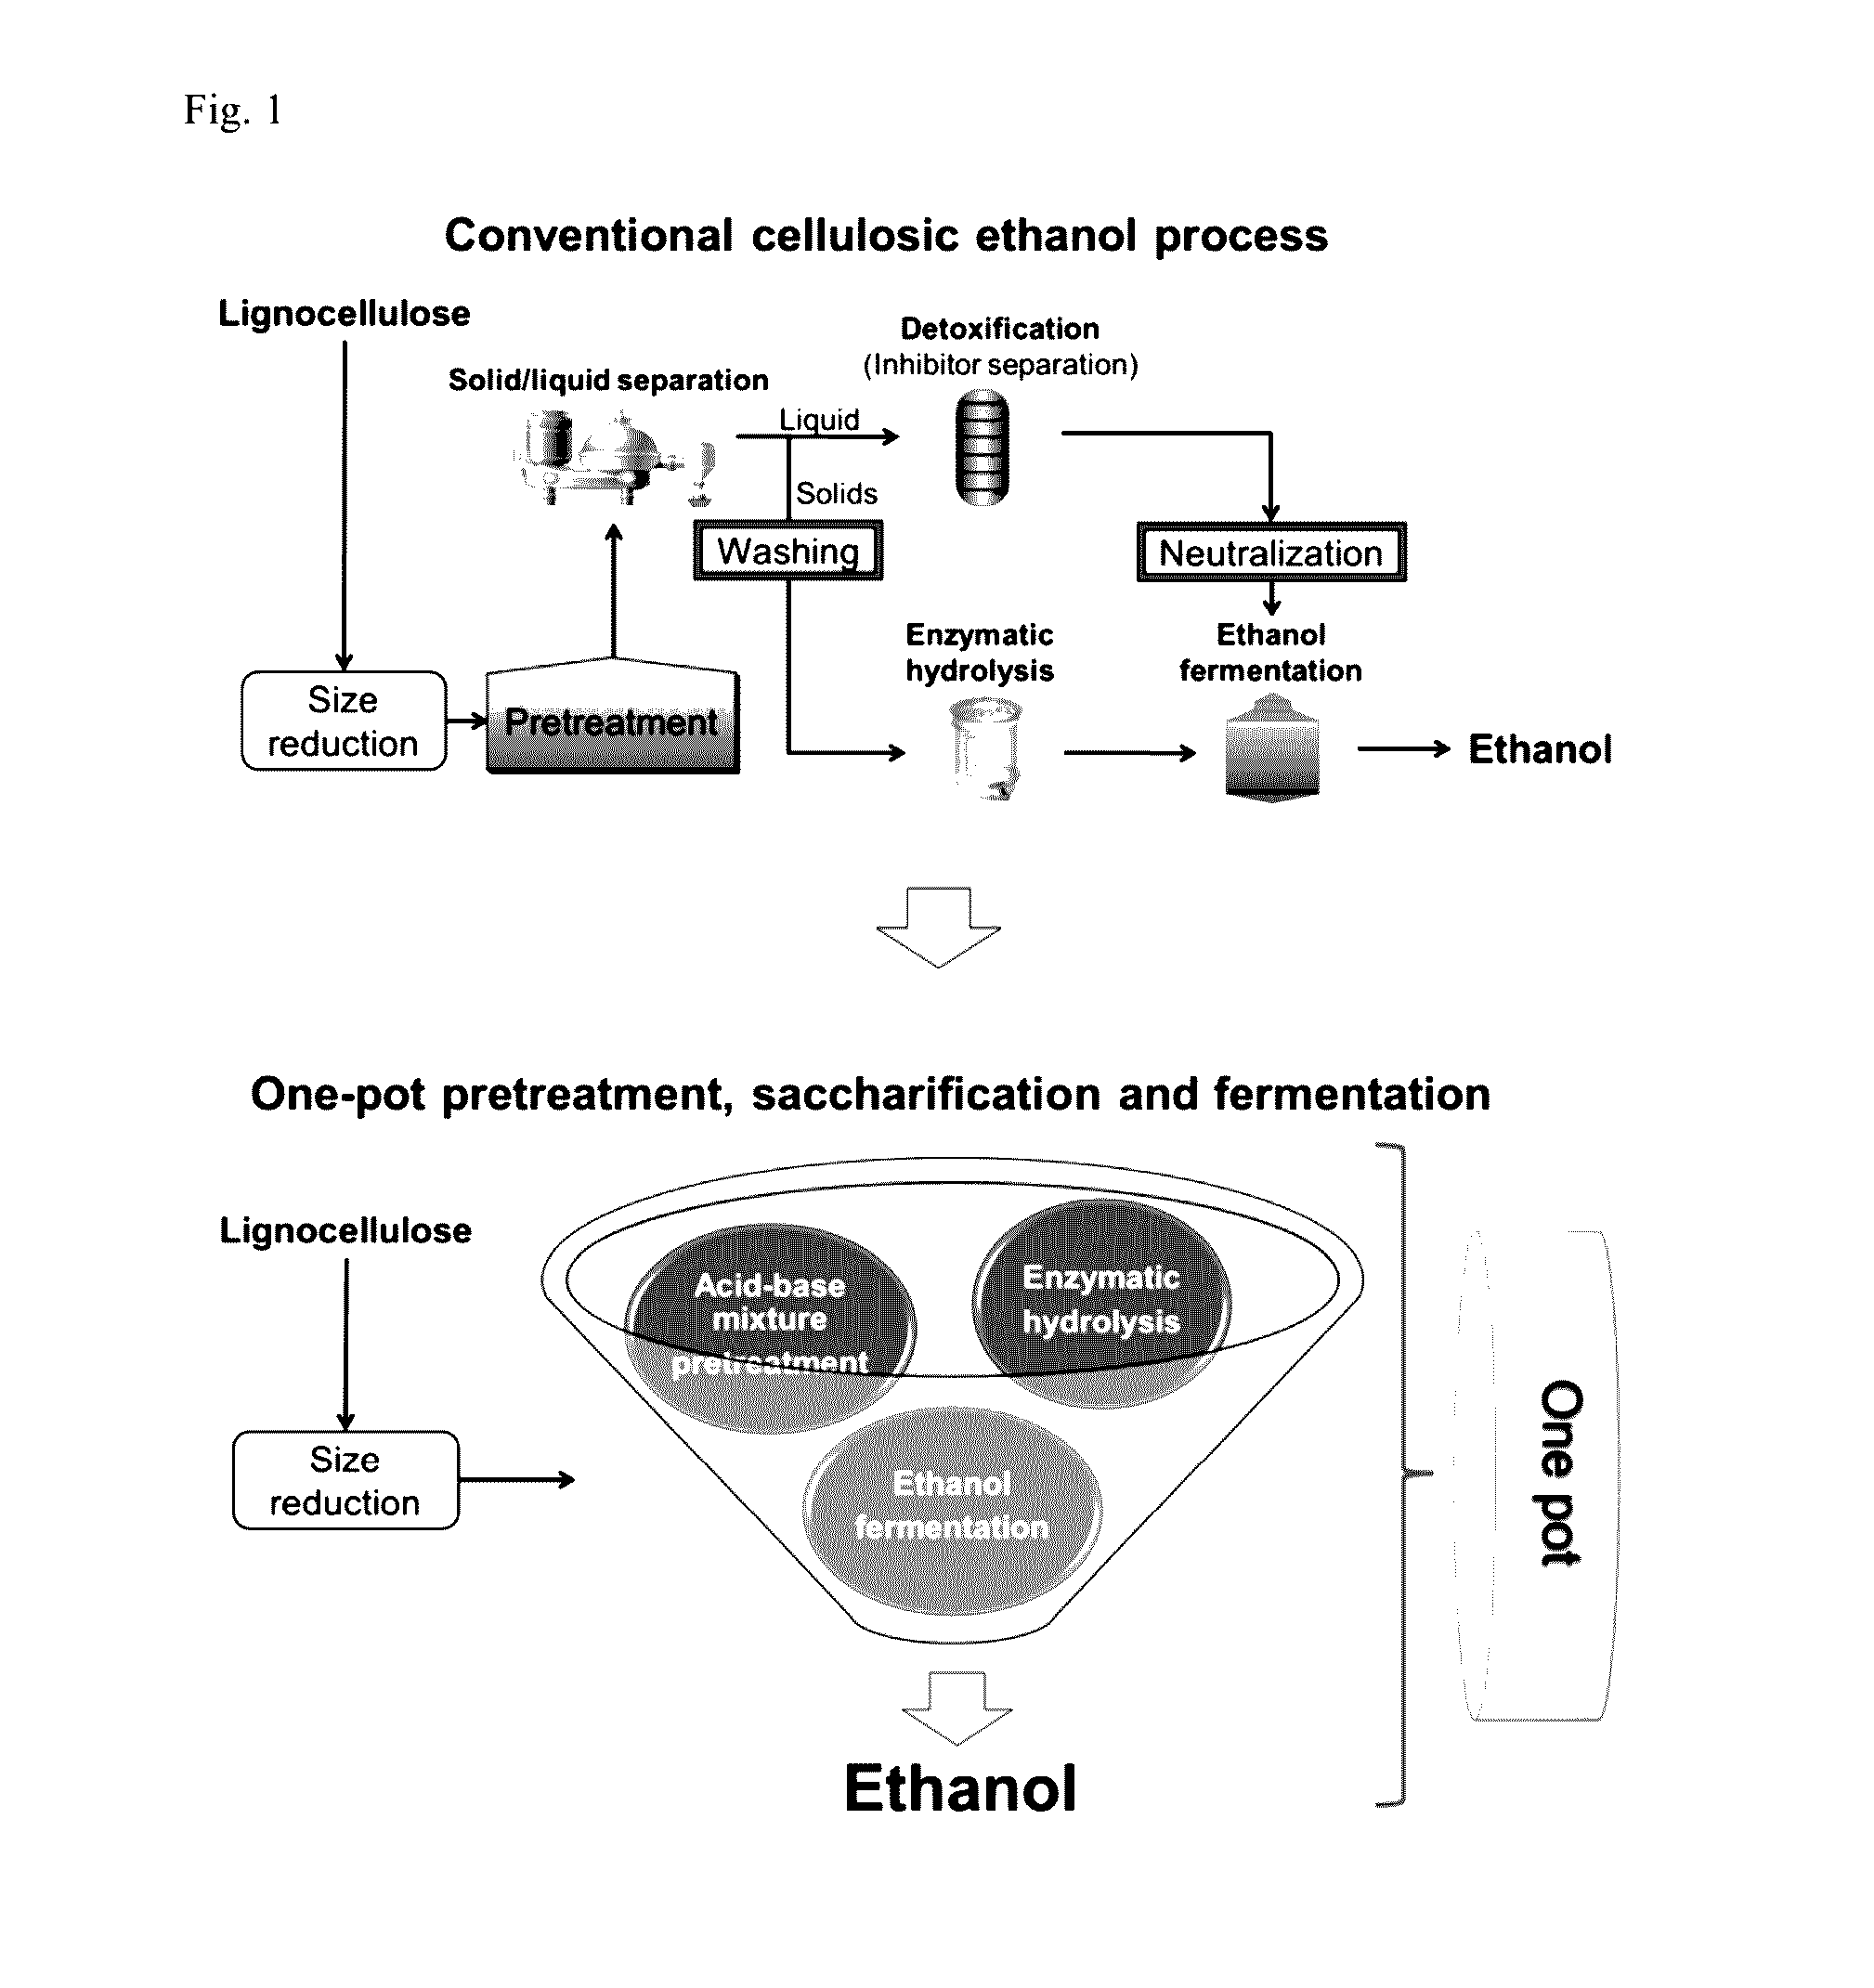 Method for pretreating lignocellulose by using acid-base mixture catalyst